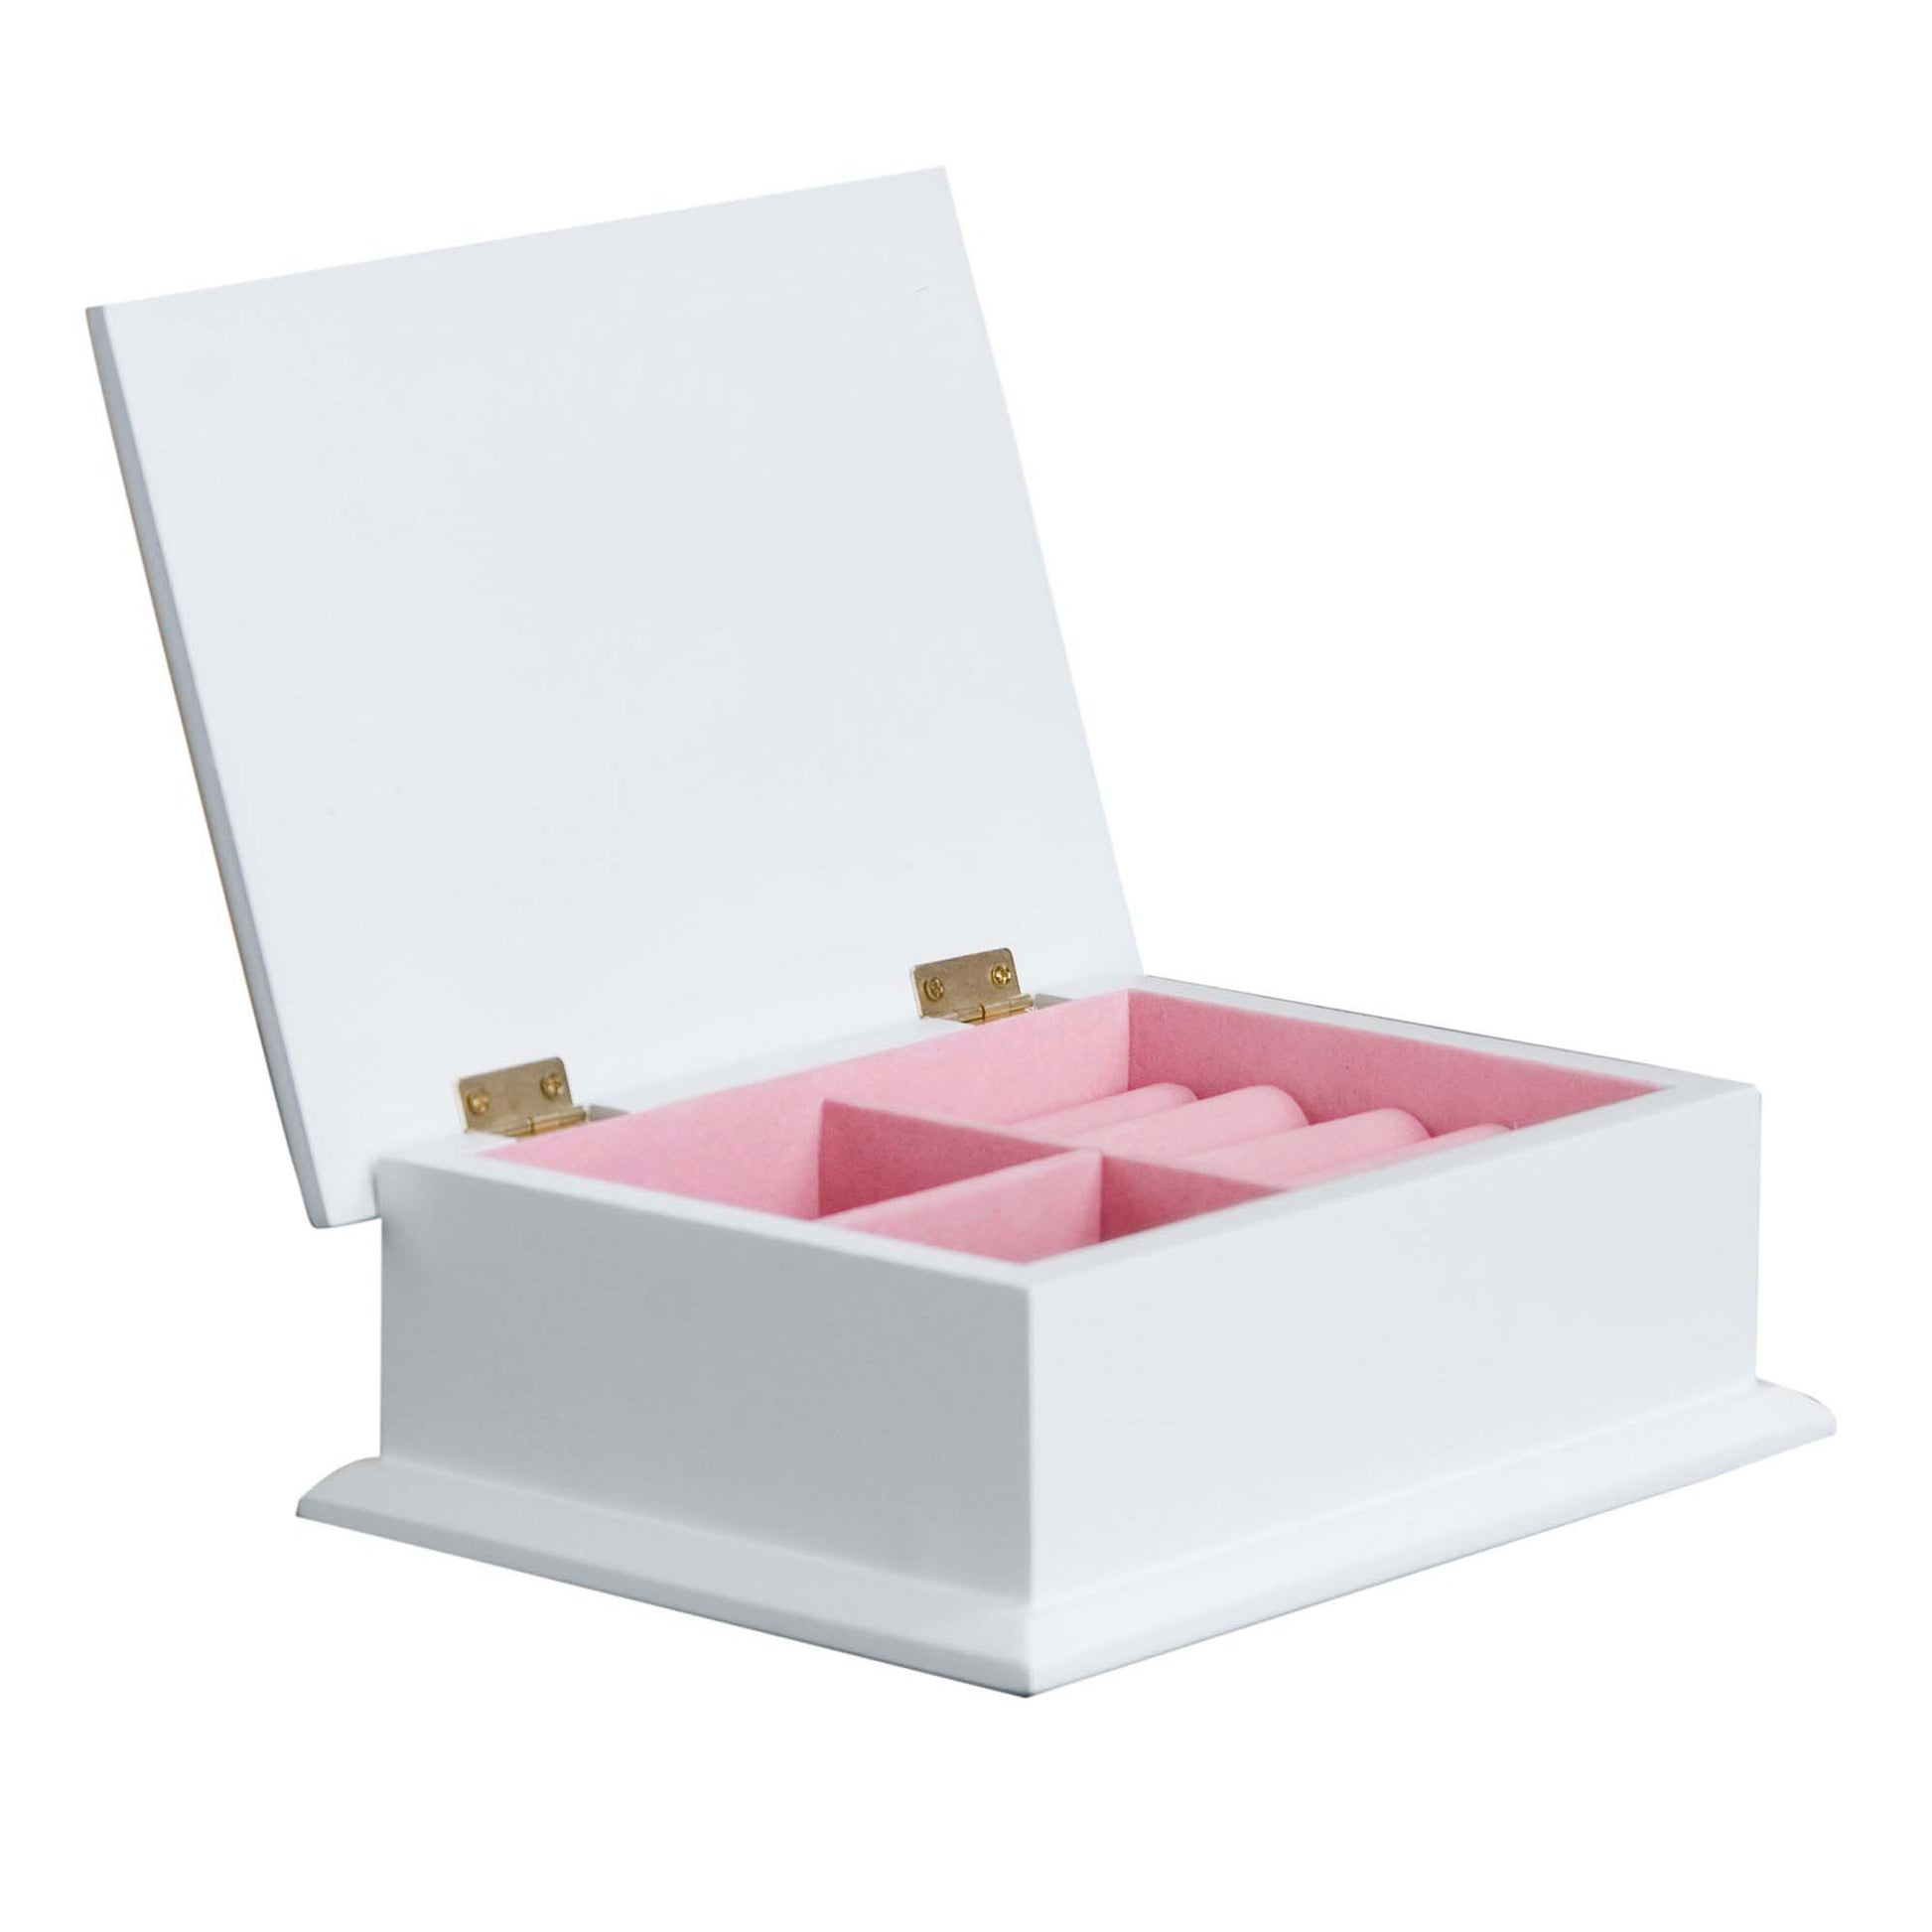 Personalized Lift Top Jewelry Box with Butterflies Pink design